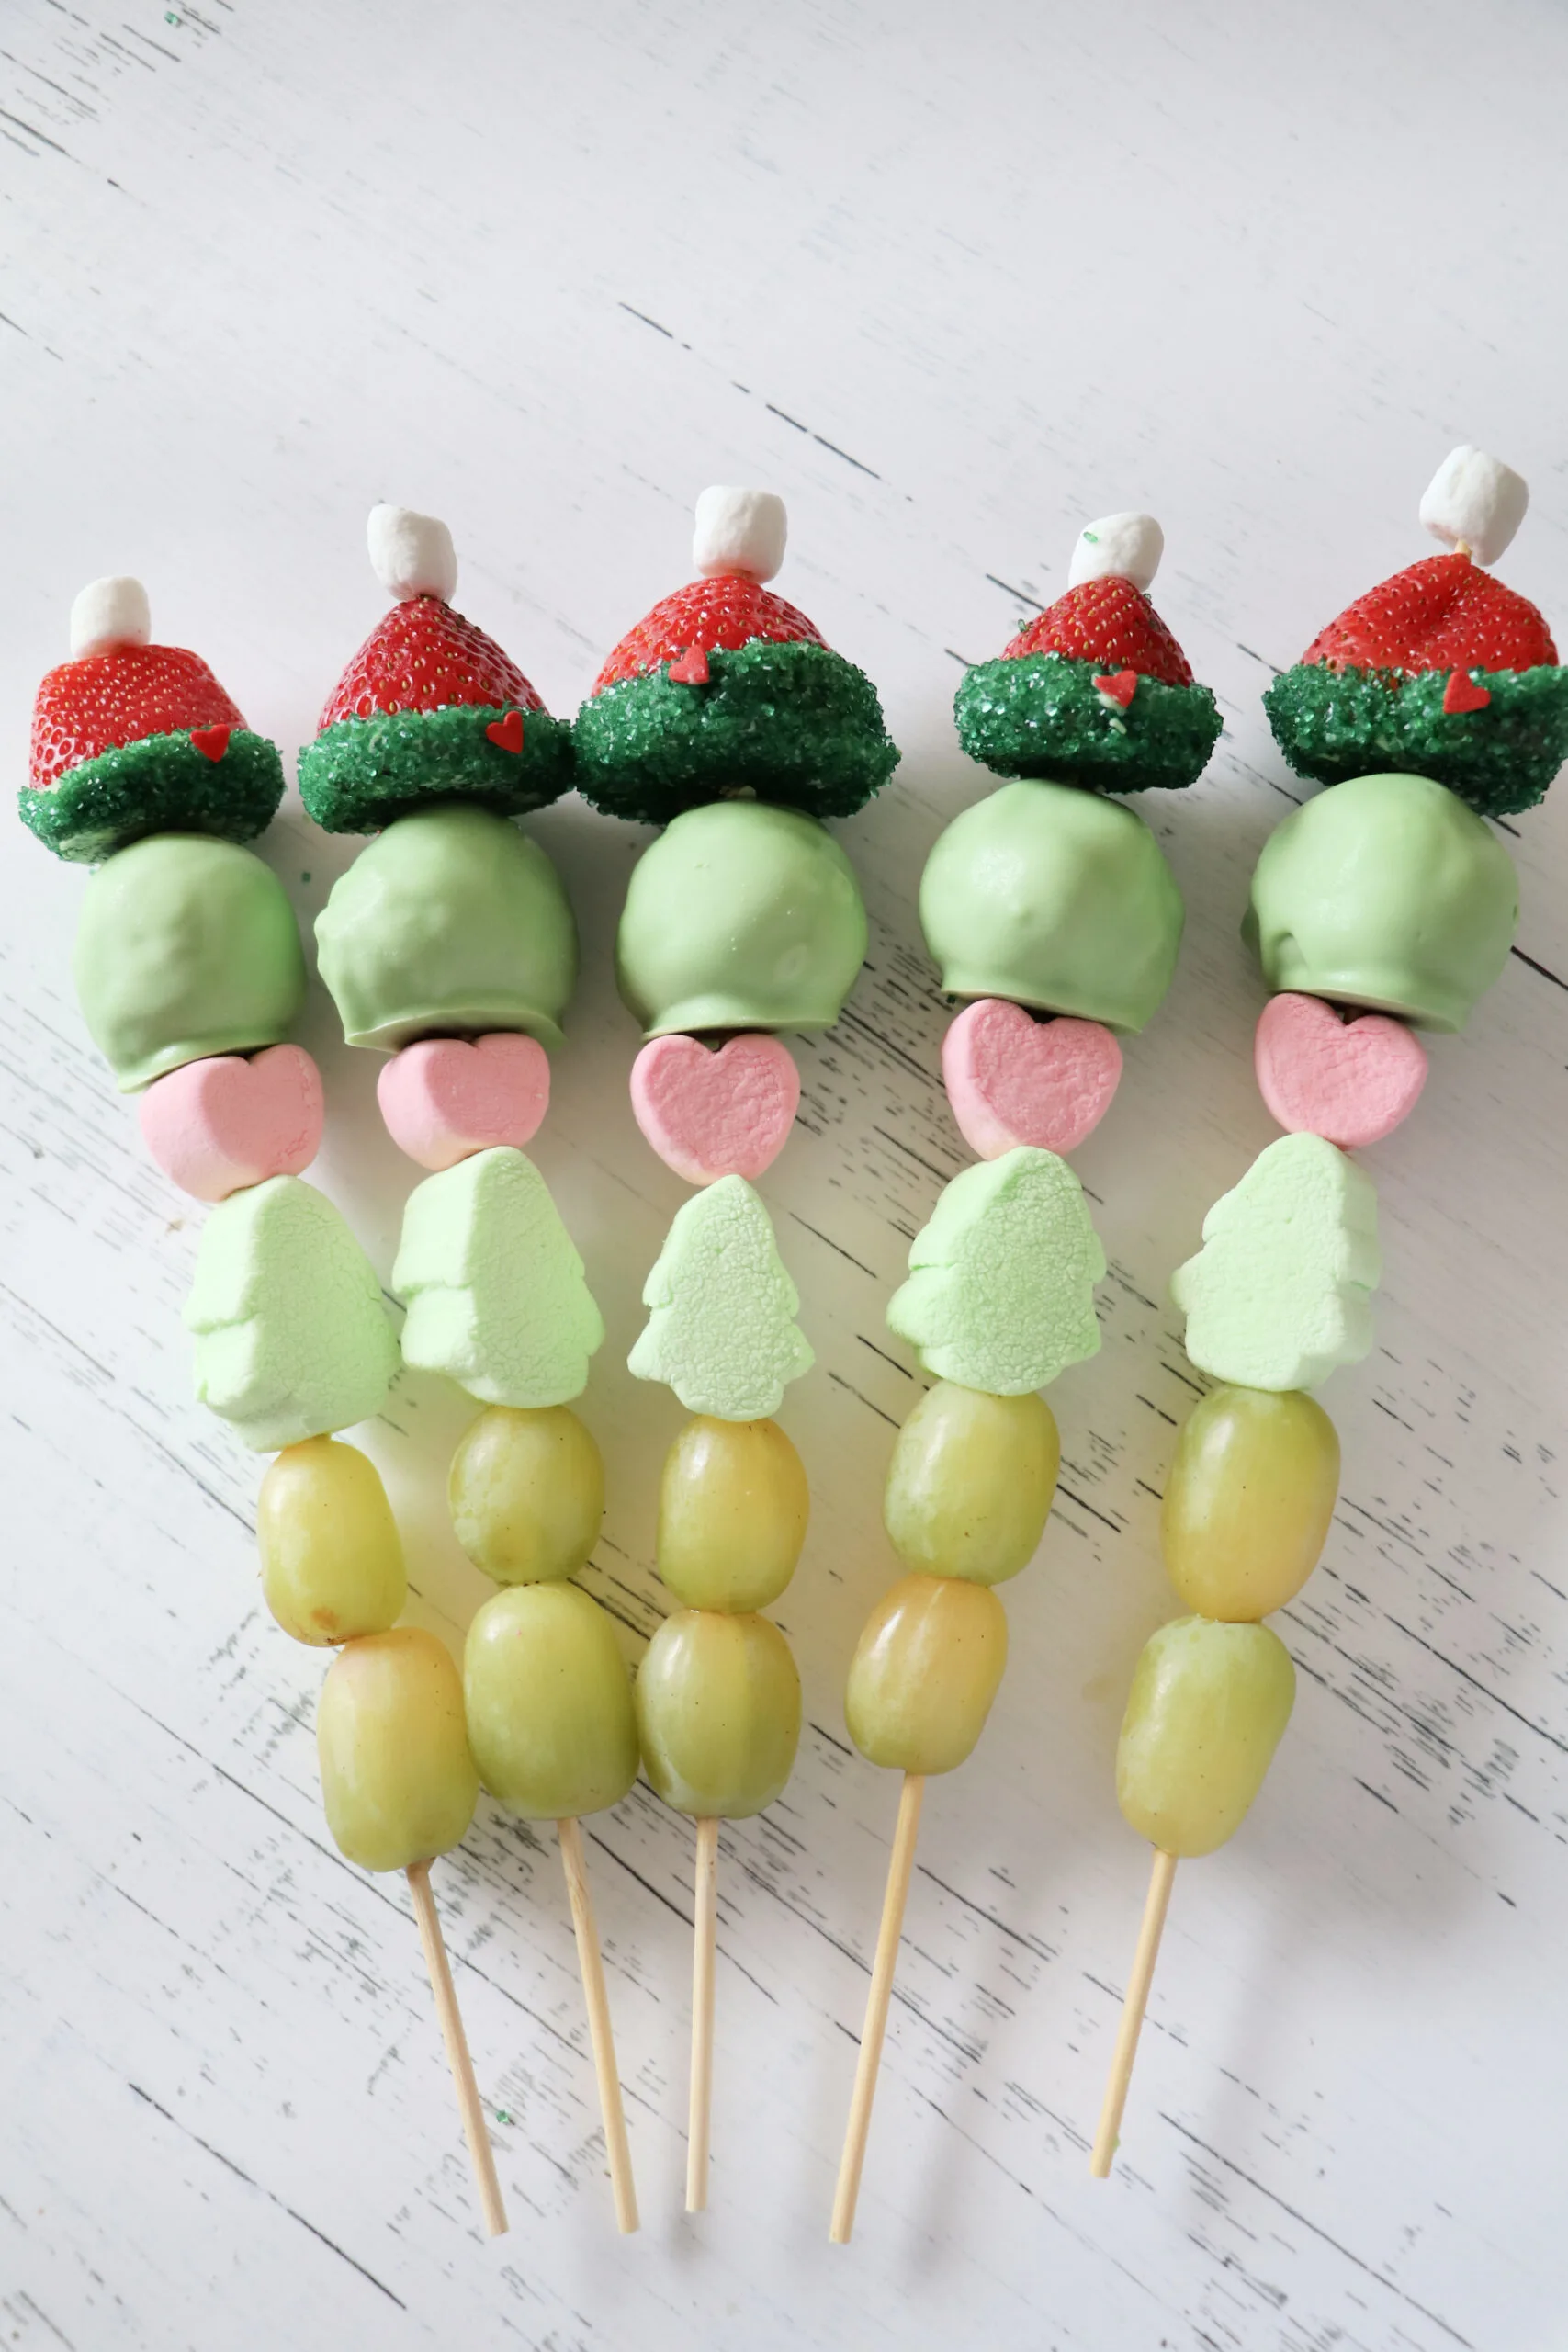 The Grinch Snack Ideas